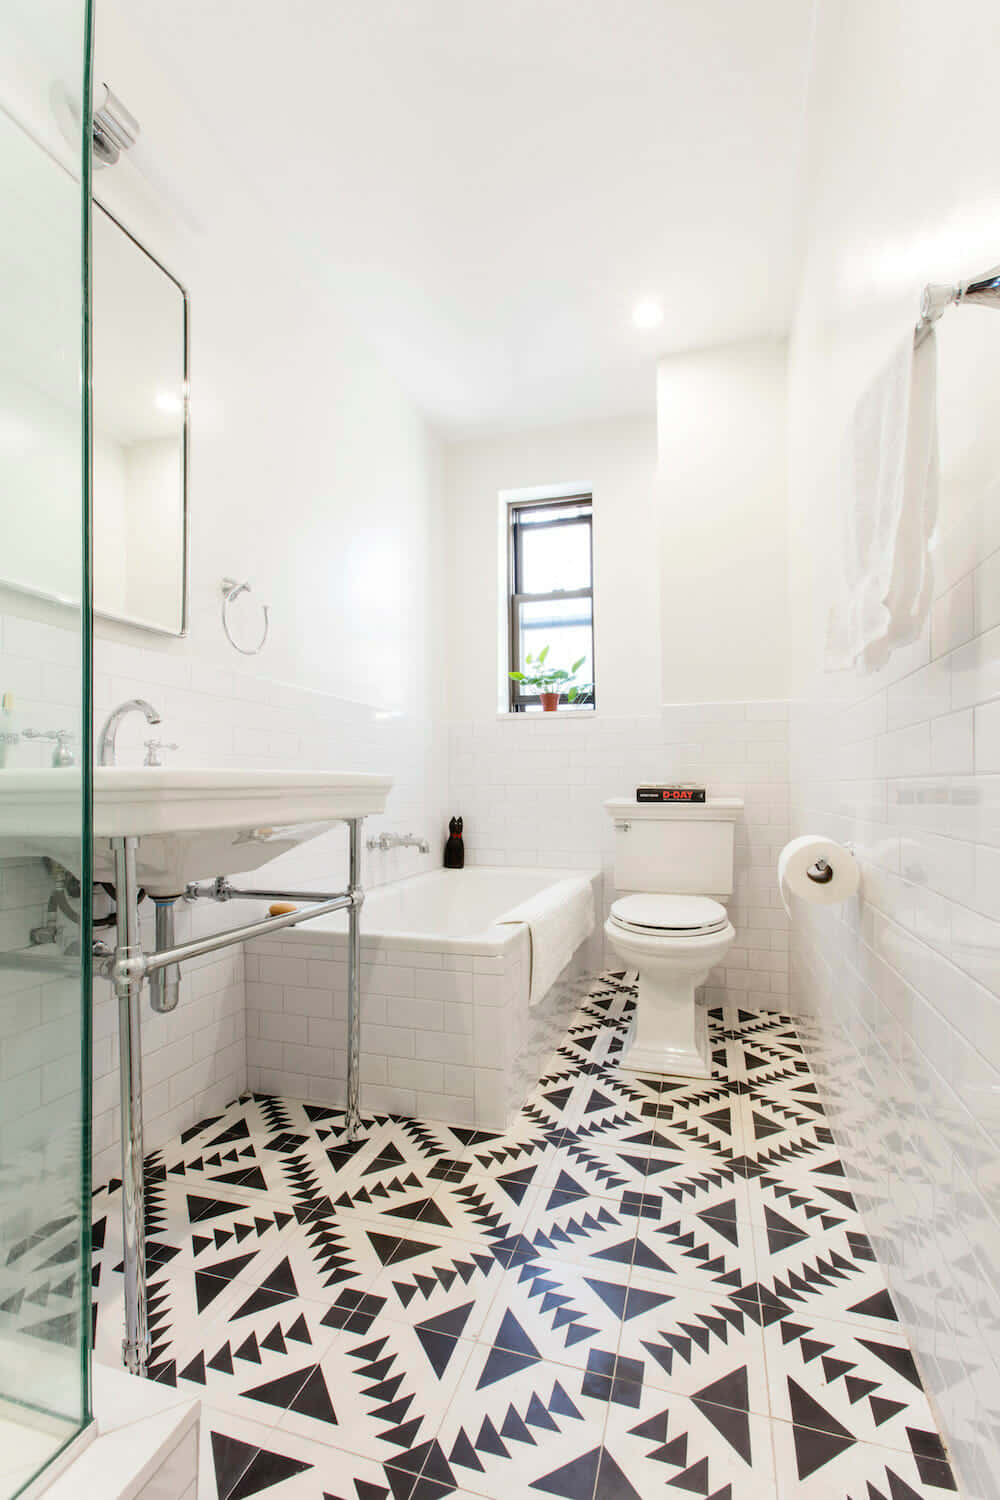 Elegant black and white bathroom with modern tile accents